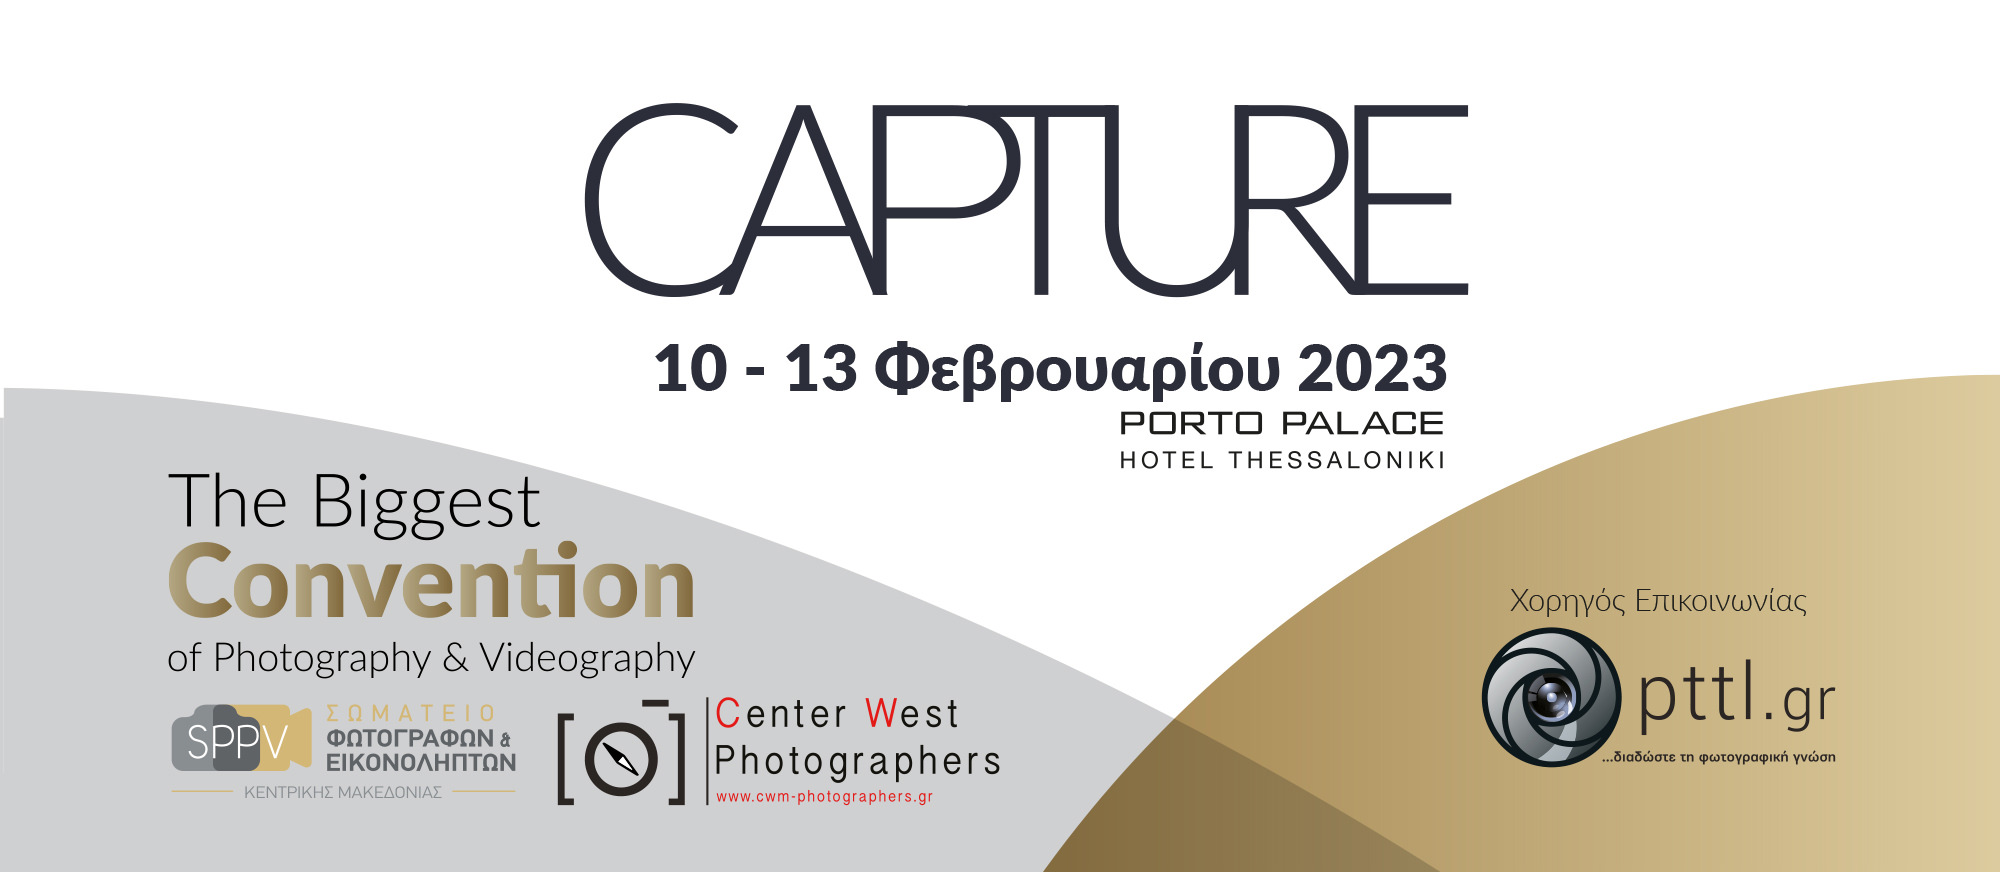 CAPTURE AND CONVENTION 2023!